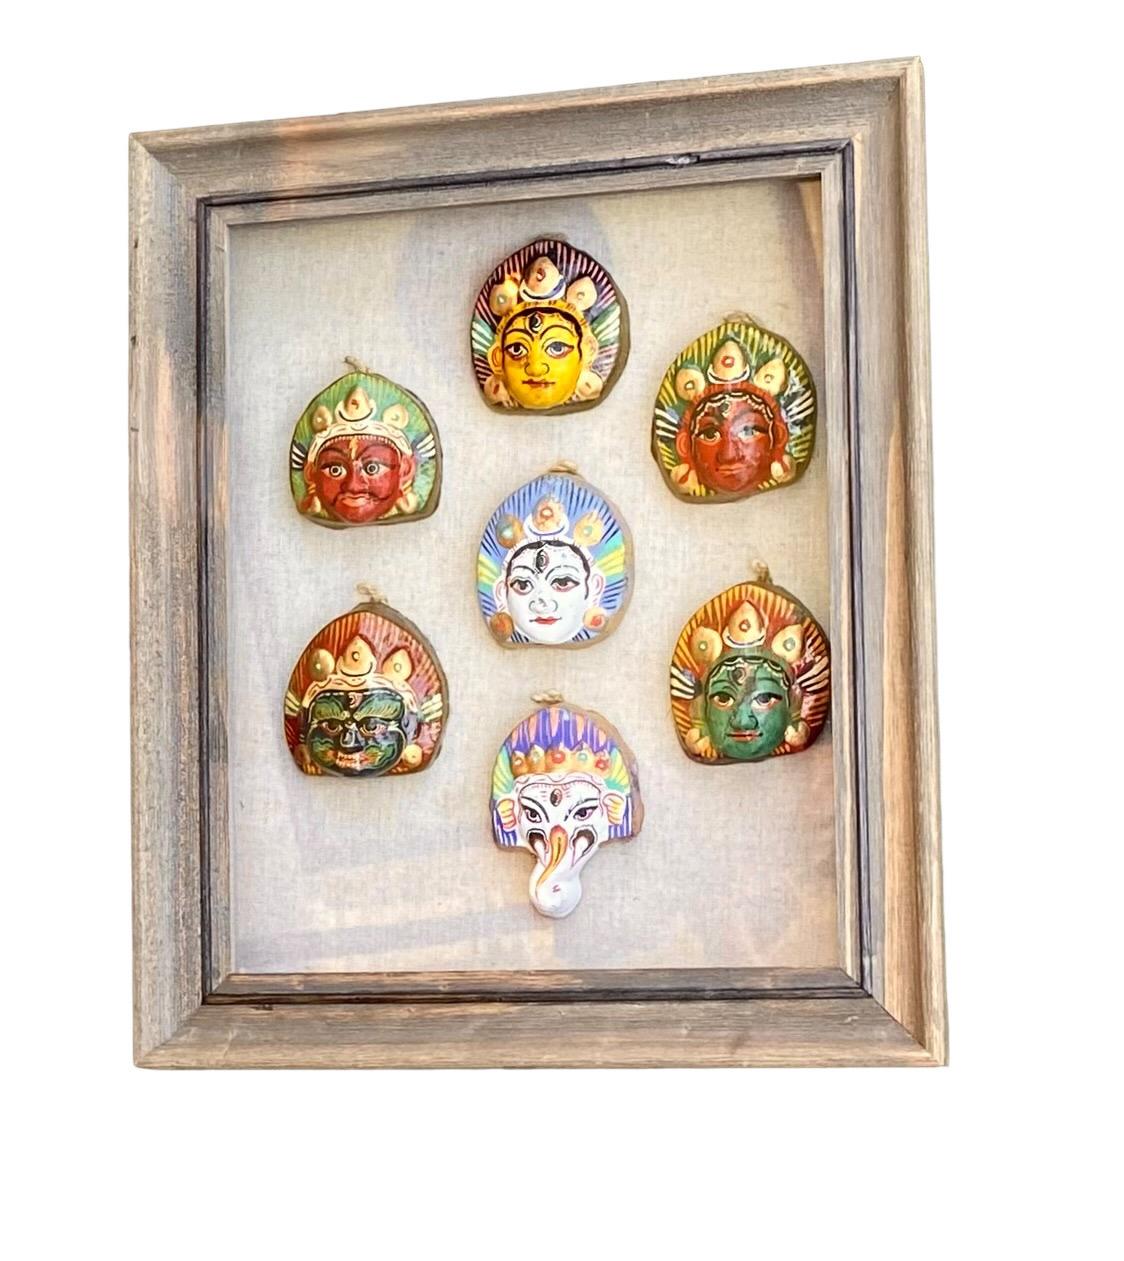 Vintage midcentury handmade and hand painted shiva third eye sculptures framed in a beautiful shadow box. This piece features seven handmade and hand painted Shiva faces with distinct third eyes. They are mounted in a shadow box with a linen fabric